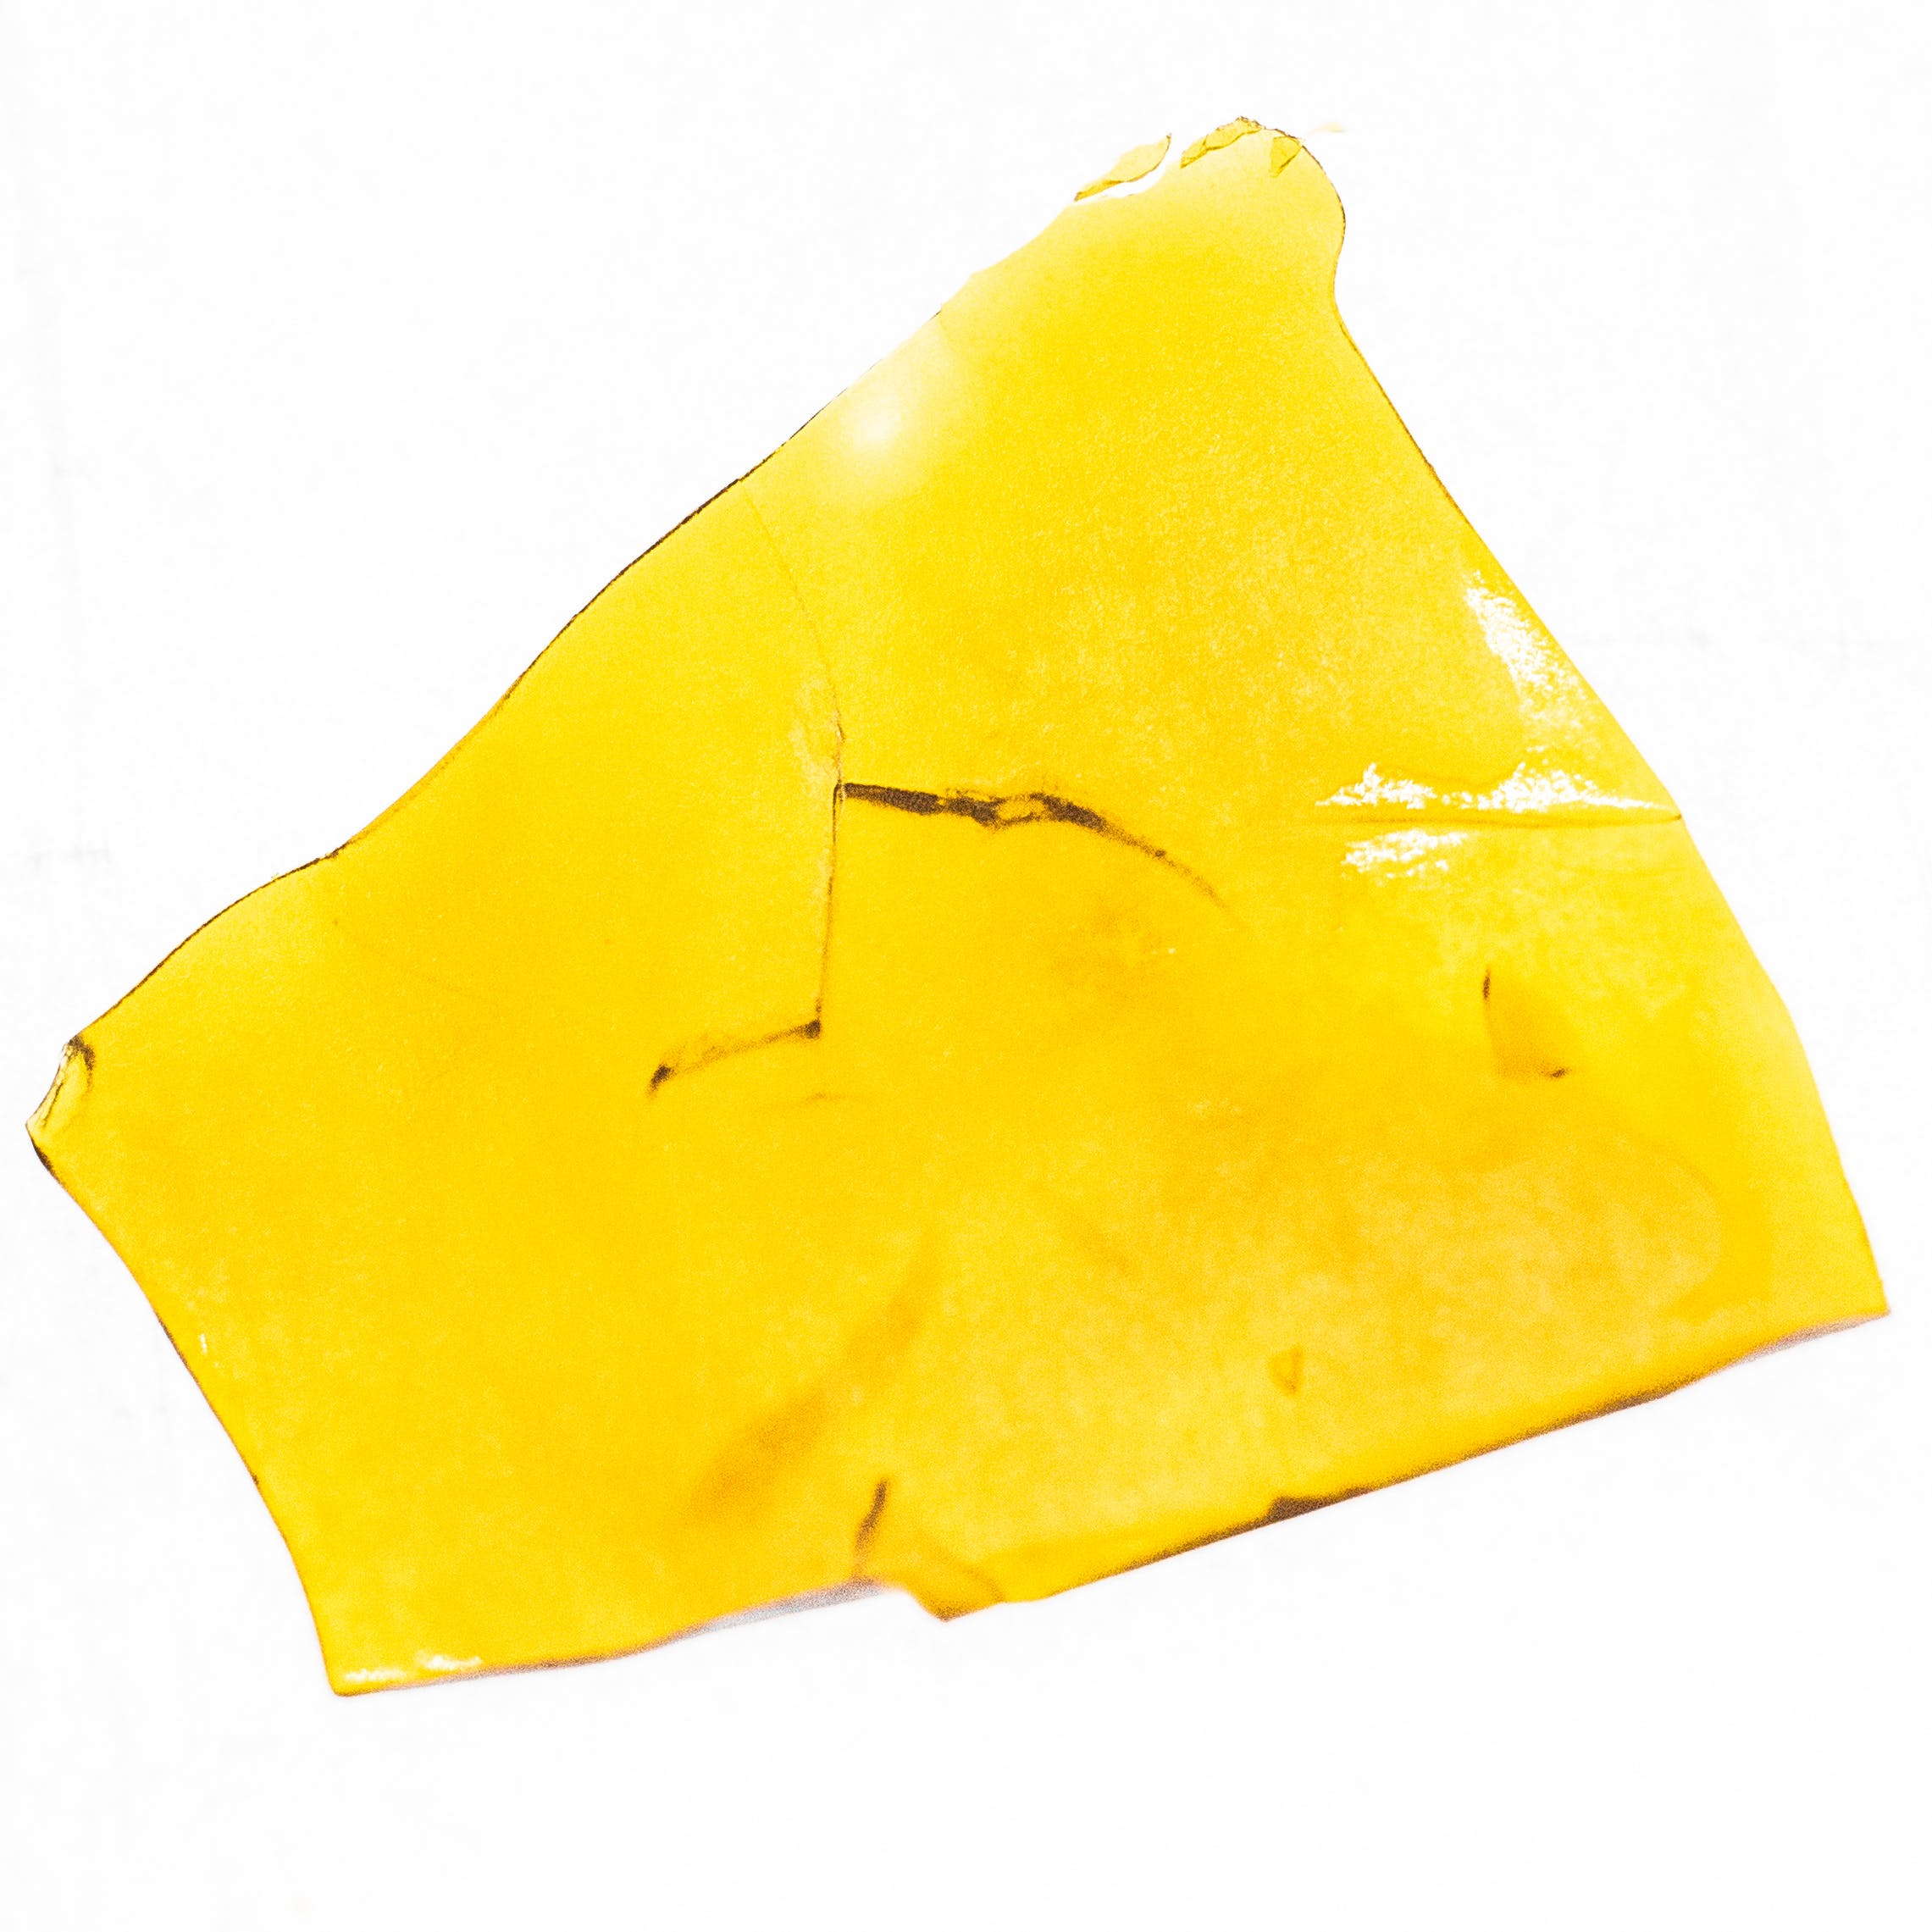 concentrate-2415-hrvst-maui-waui-shatter-s-65-72-25